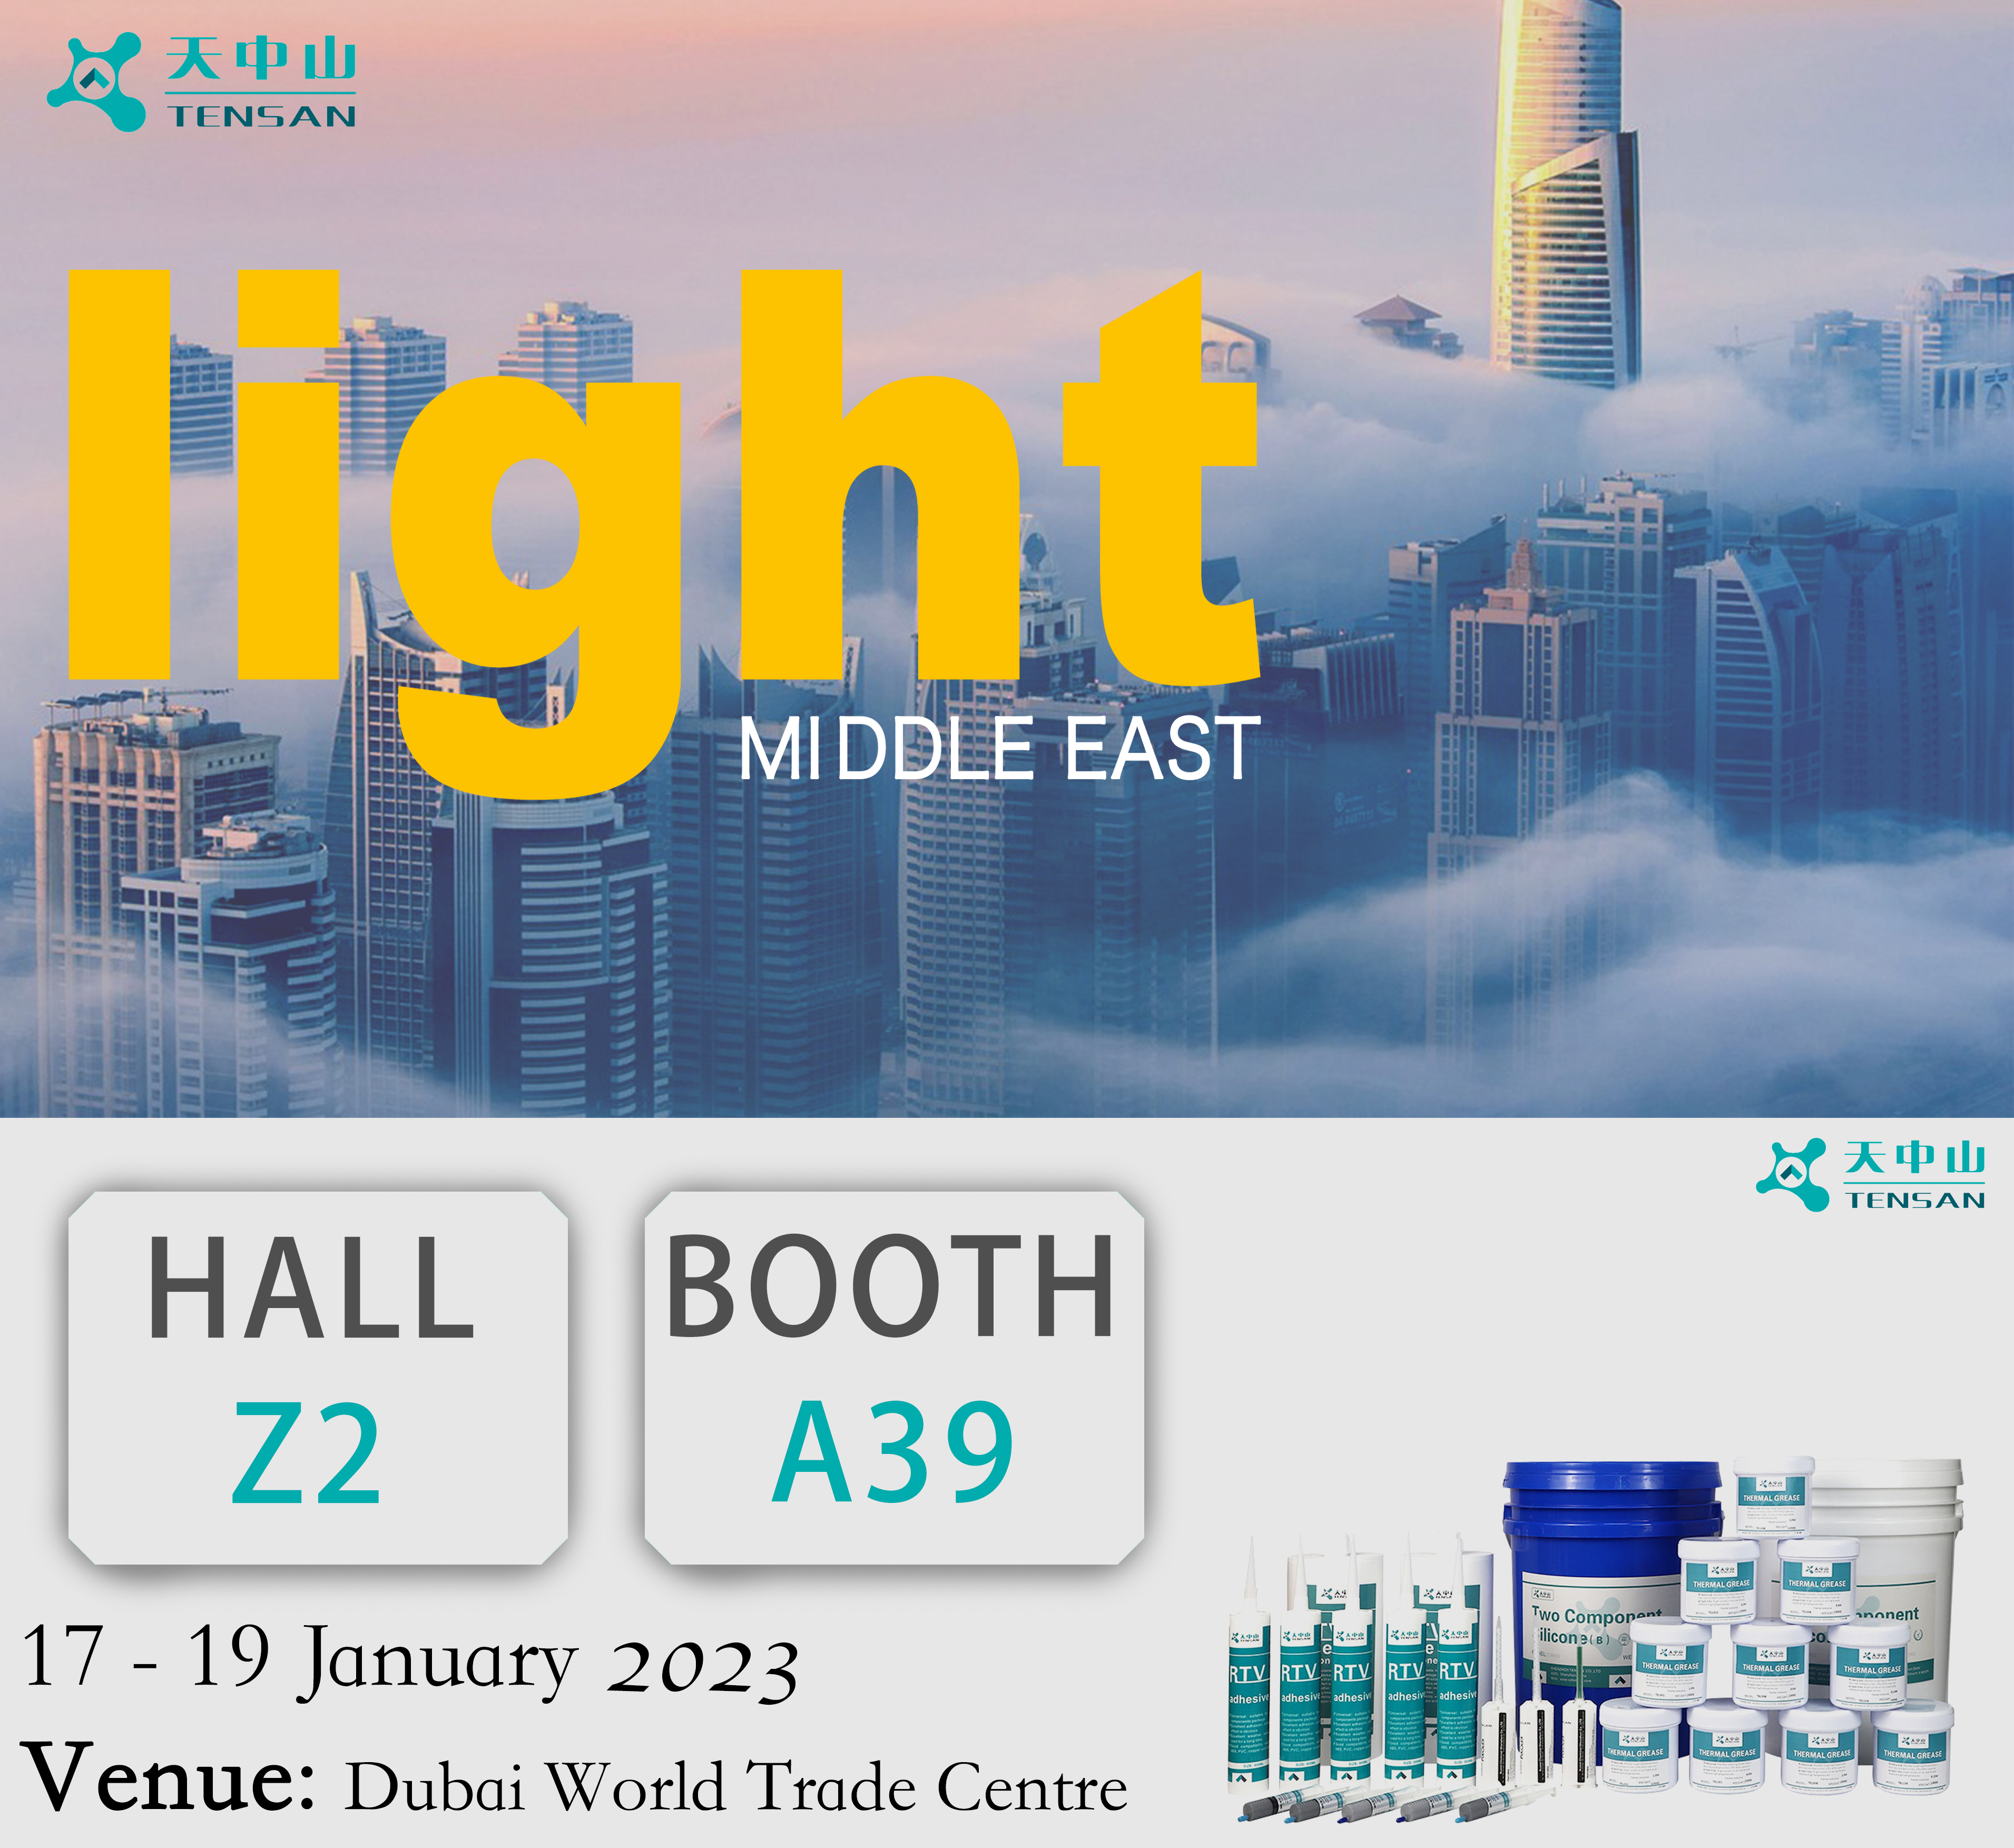 TENSAN will be in Light Middle East exhibition next Jan!